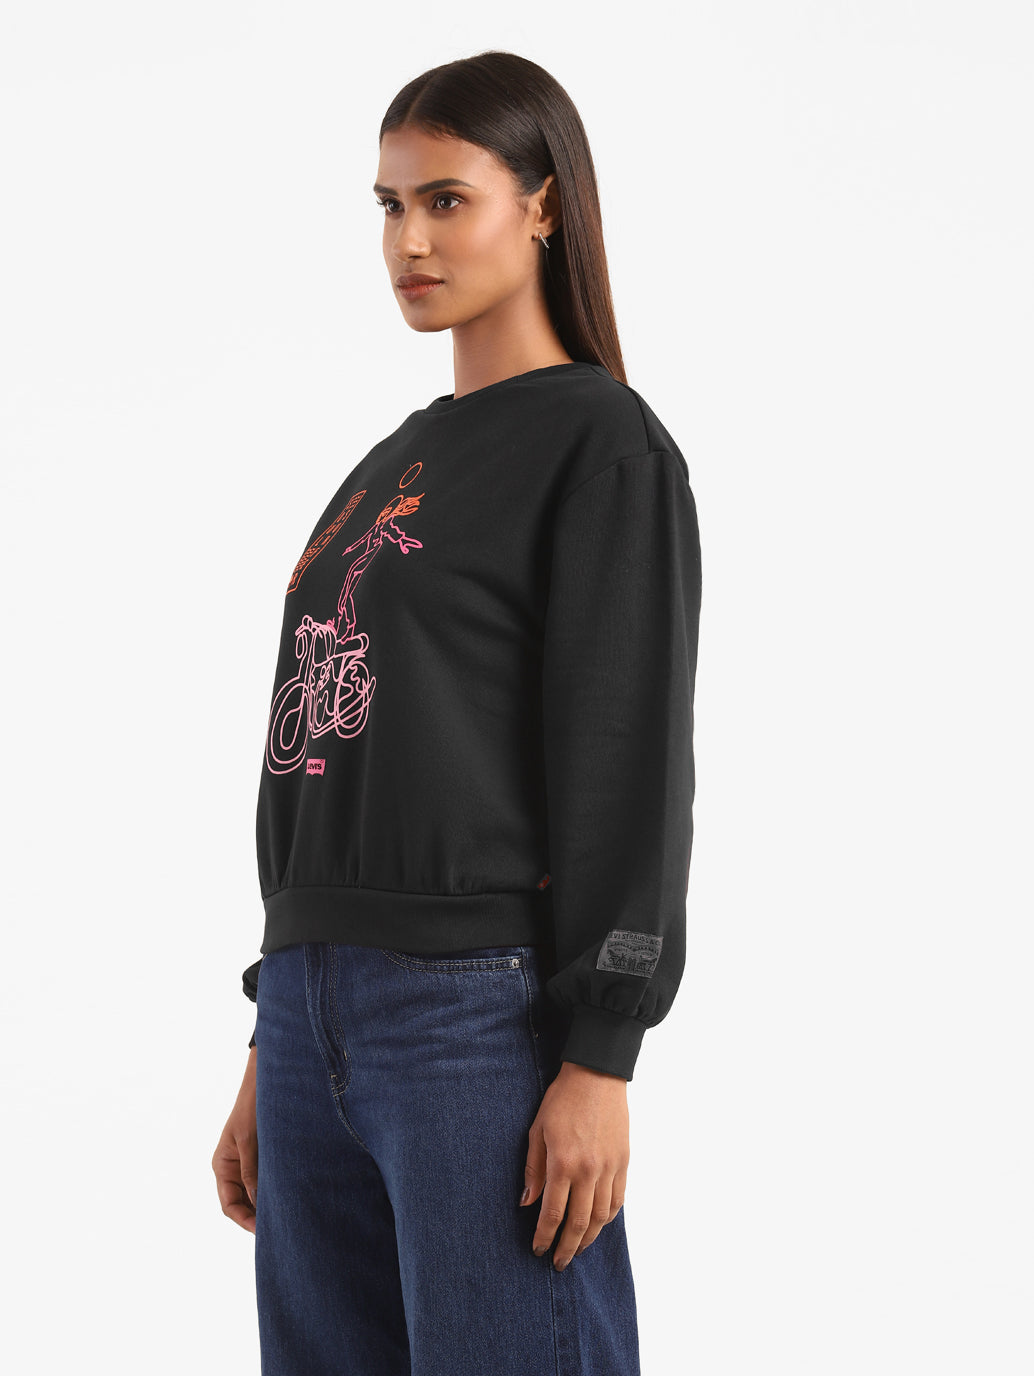 Graphic Sweatshirt From The Levi's Motorcycle Collection